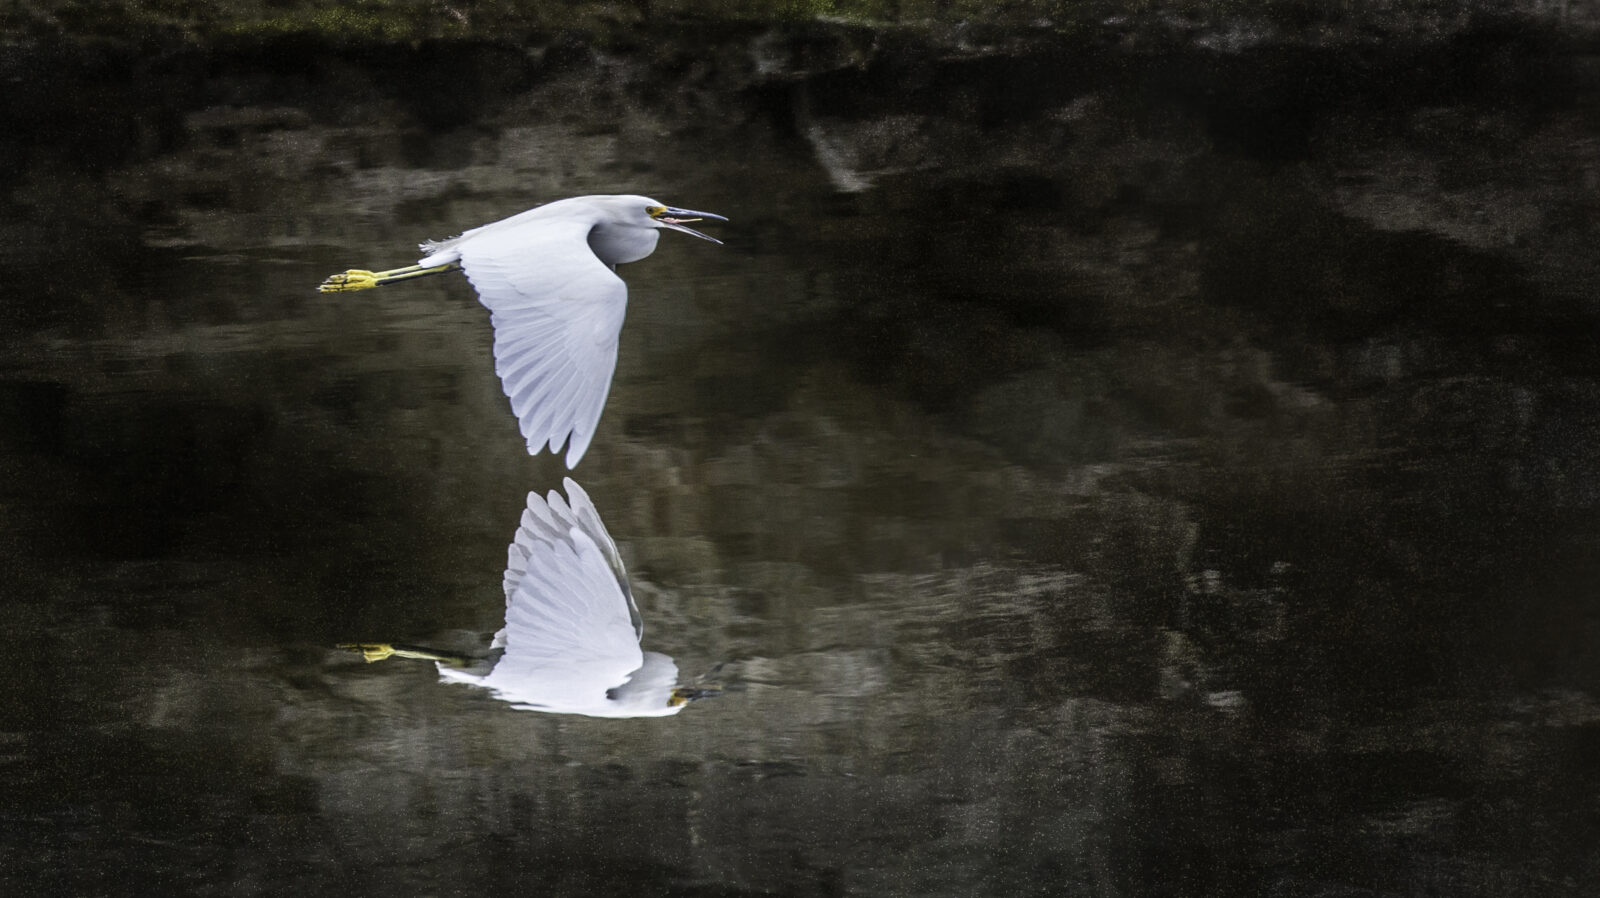 A white bird with yellow beak and legs flies over water.